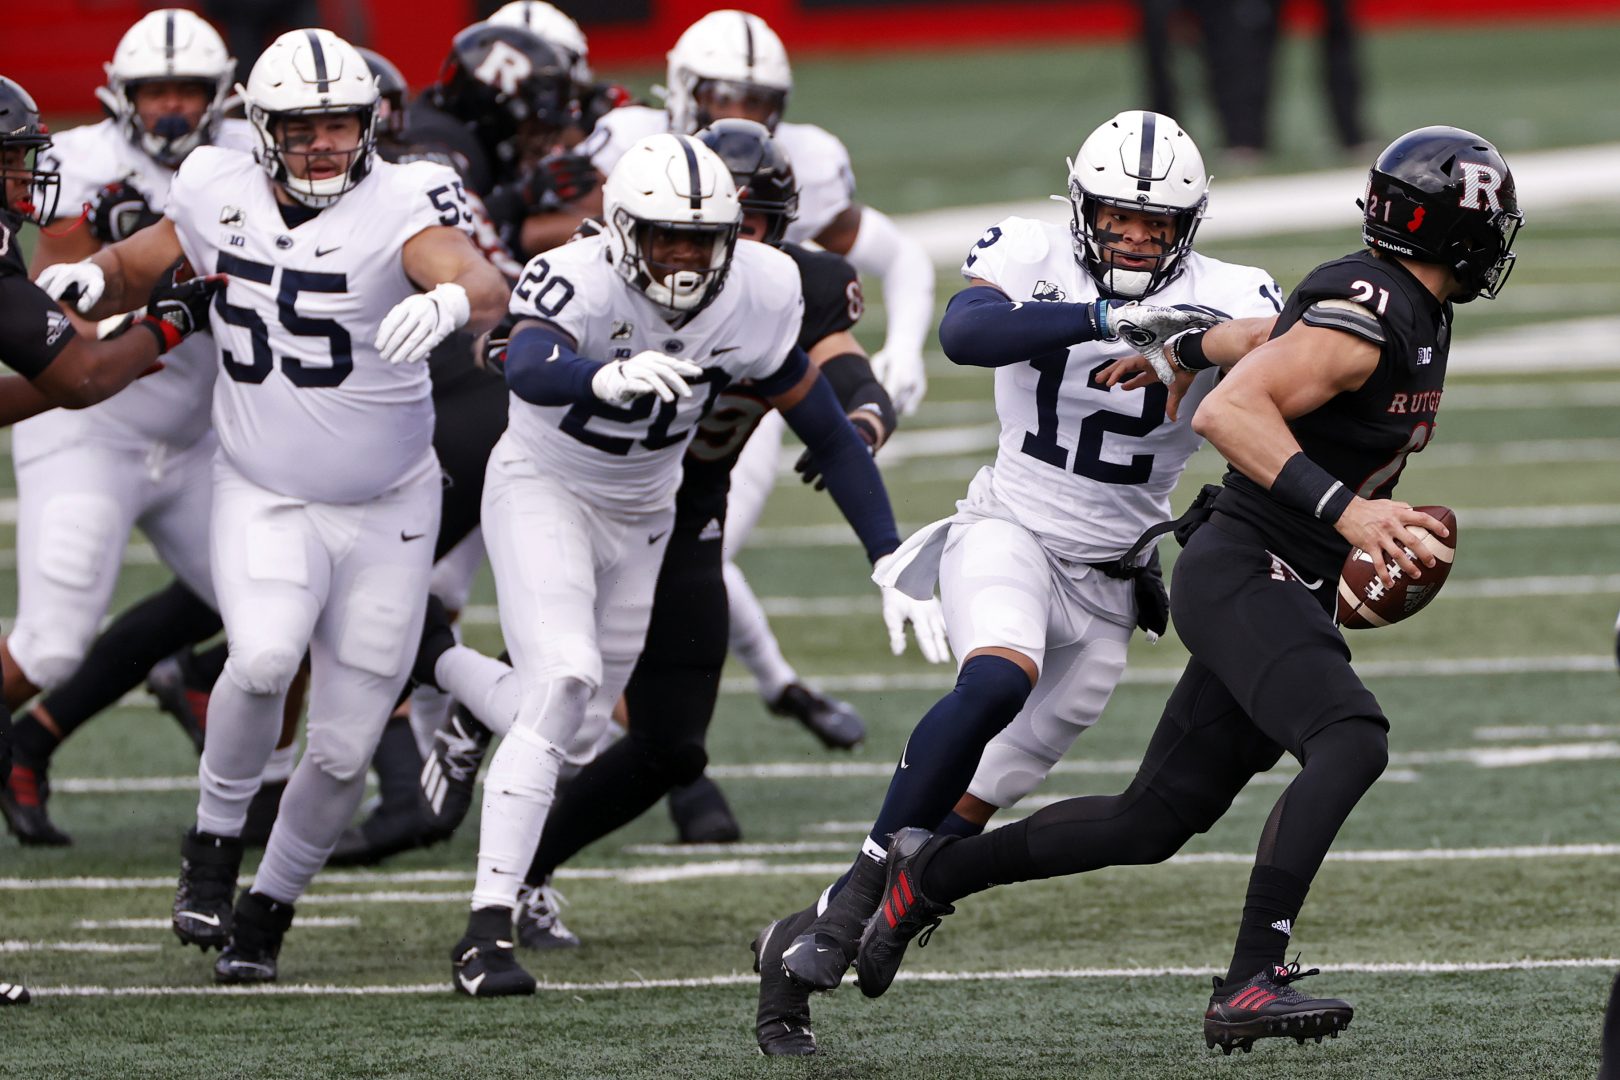 Penn State linebacker Brandon Smith (12) tackles Rutgers quarterback Johnny Langan (21) during the first half of an NCAA college football game Saturday, Dec. 5, 2020, in Piscataway, N.J.